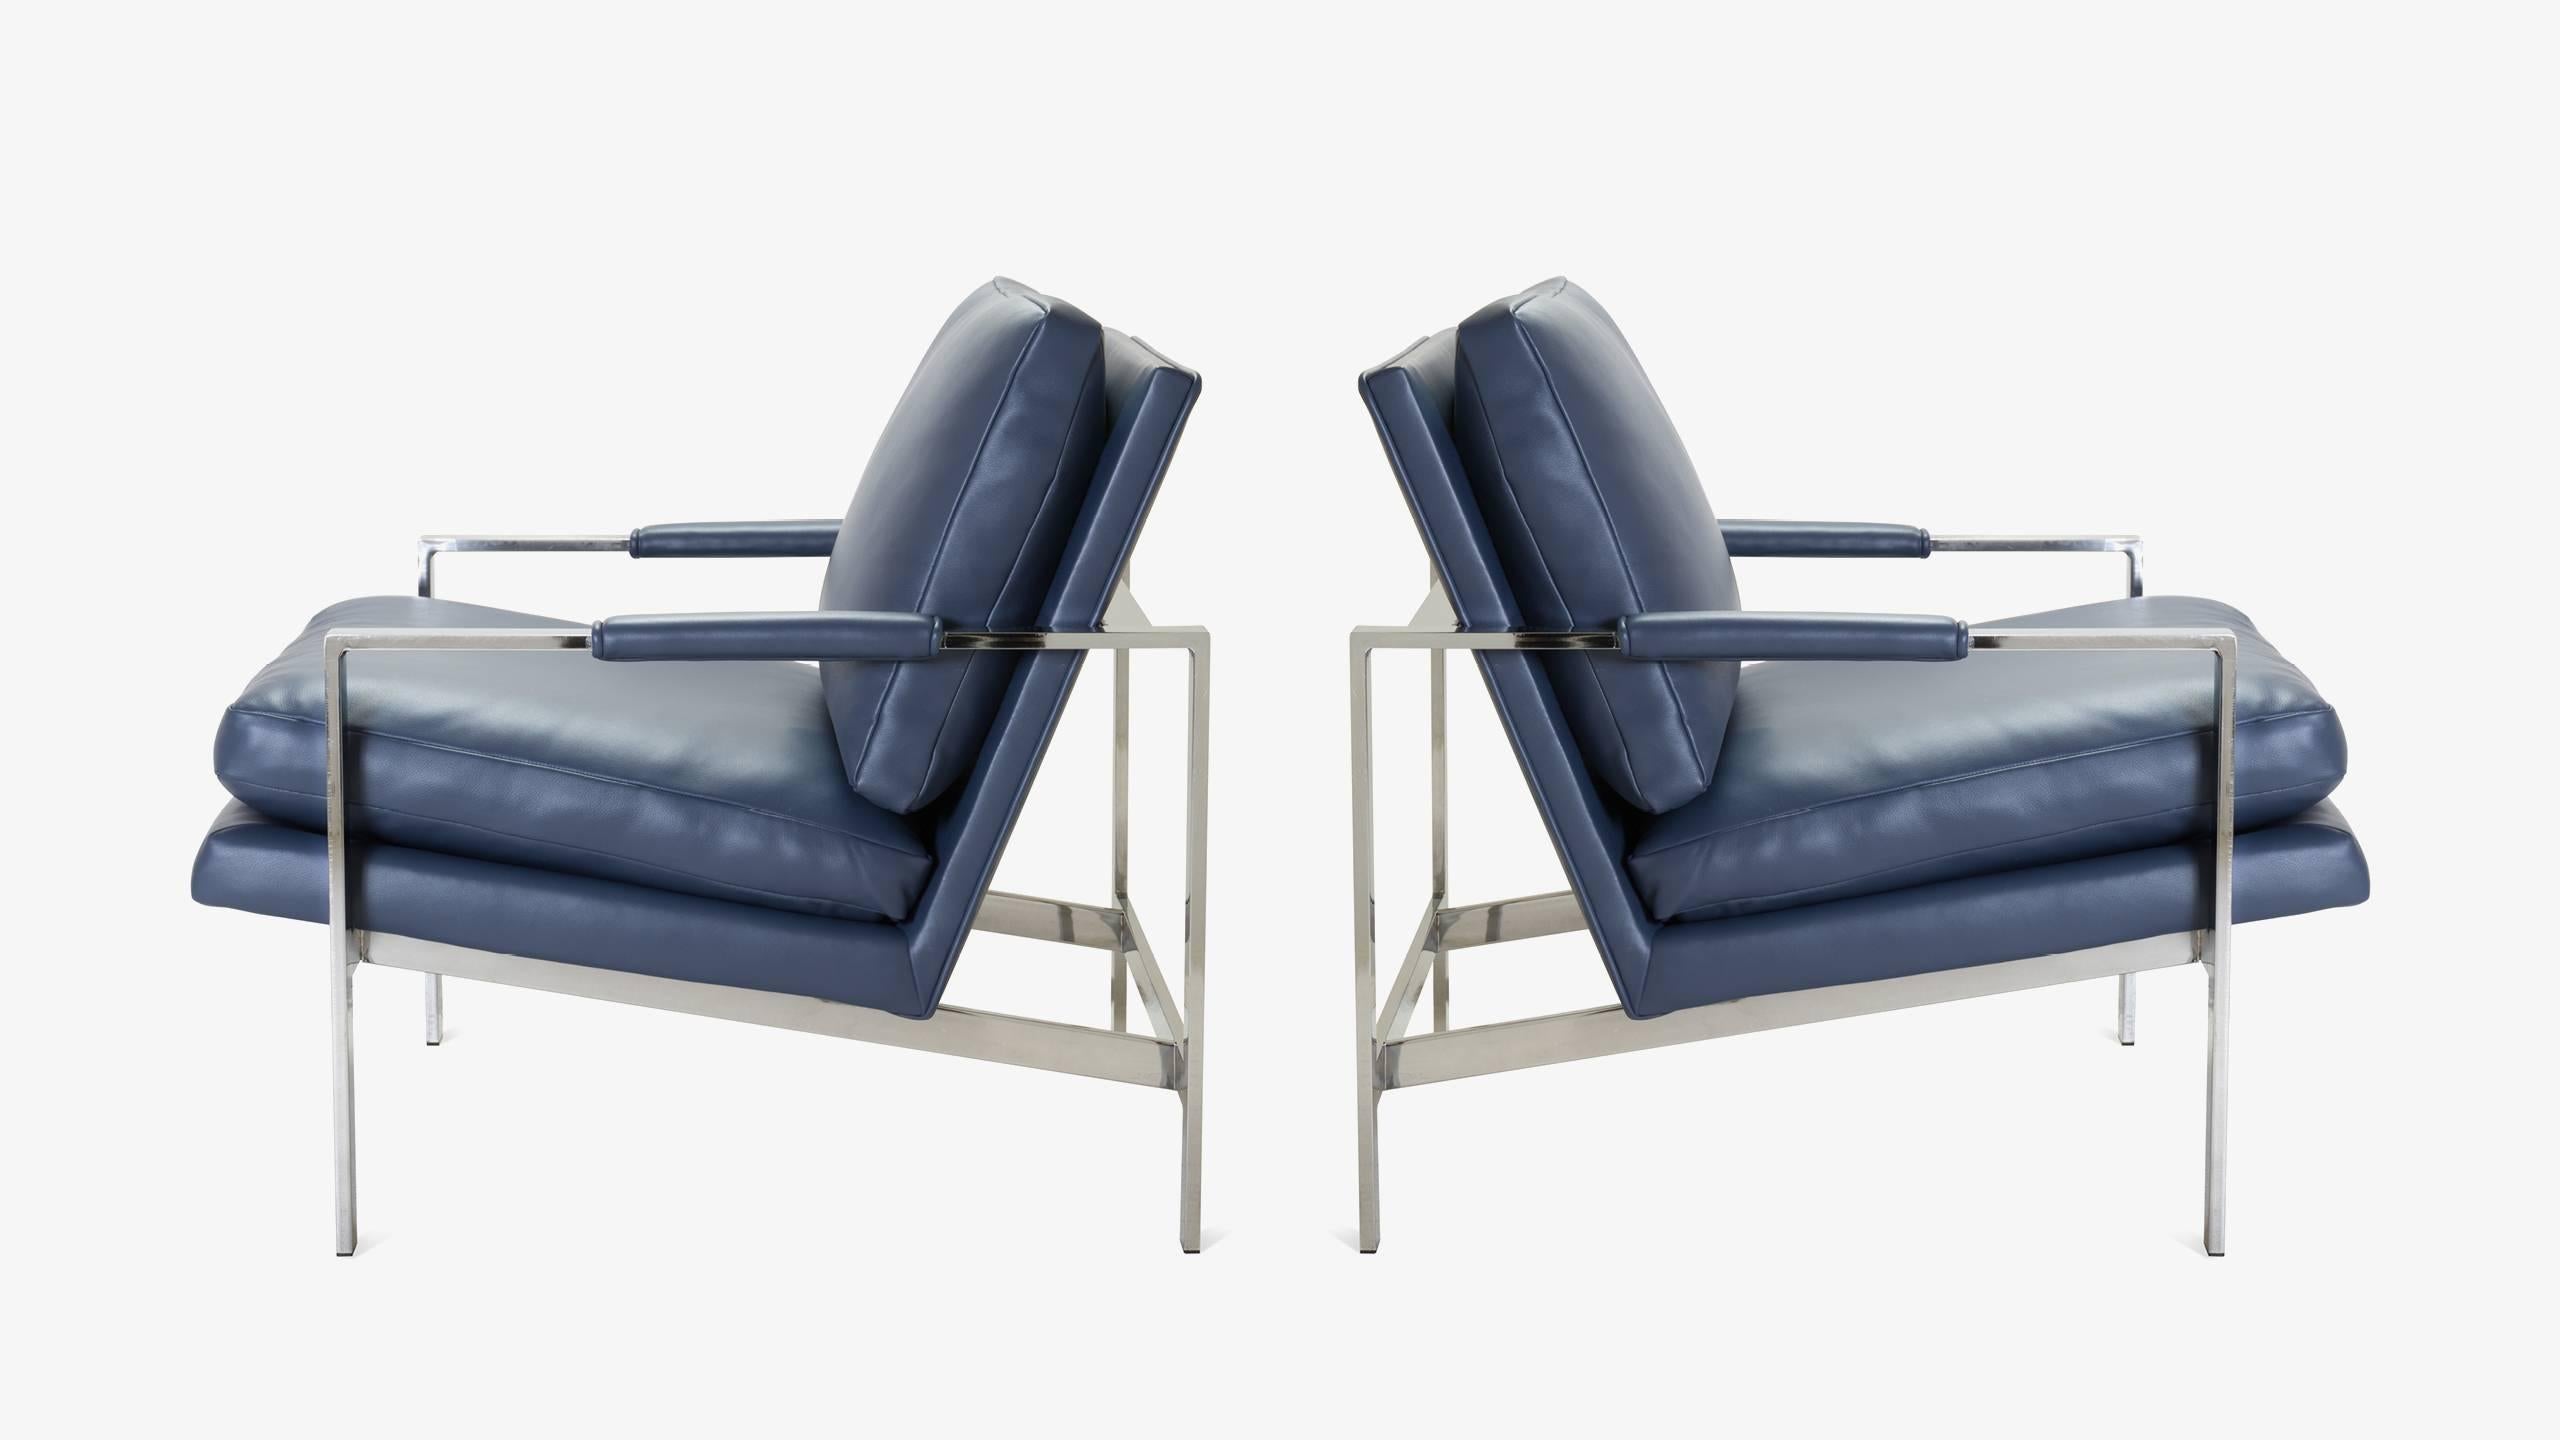 A familiar design from the great designer/manufacturer duo; Milo Baughman for Thayer Coggin. The Montage Workroom completely restored this handsome pair replacing their original vinyl with genuine imported Italian Leather in Navy, an incredibly